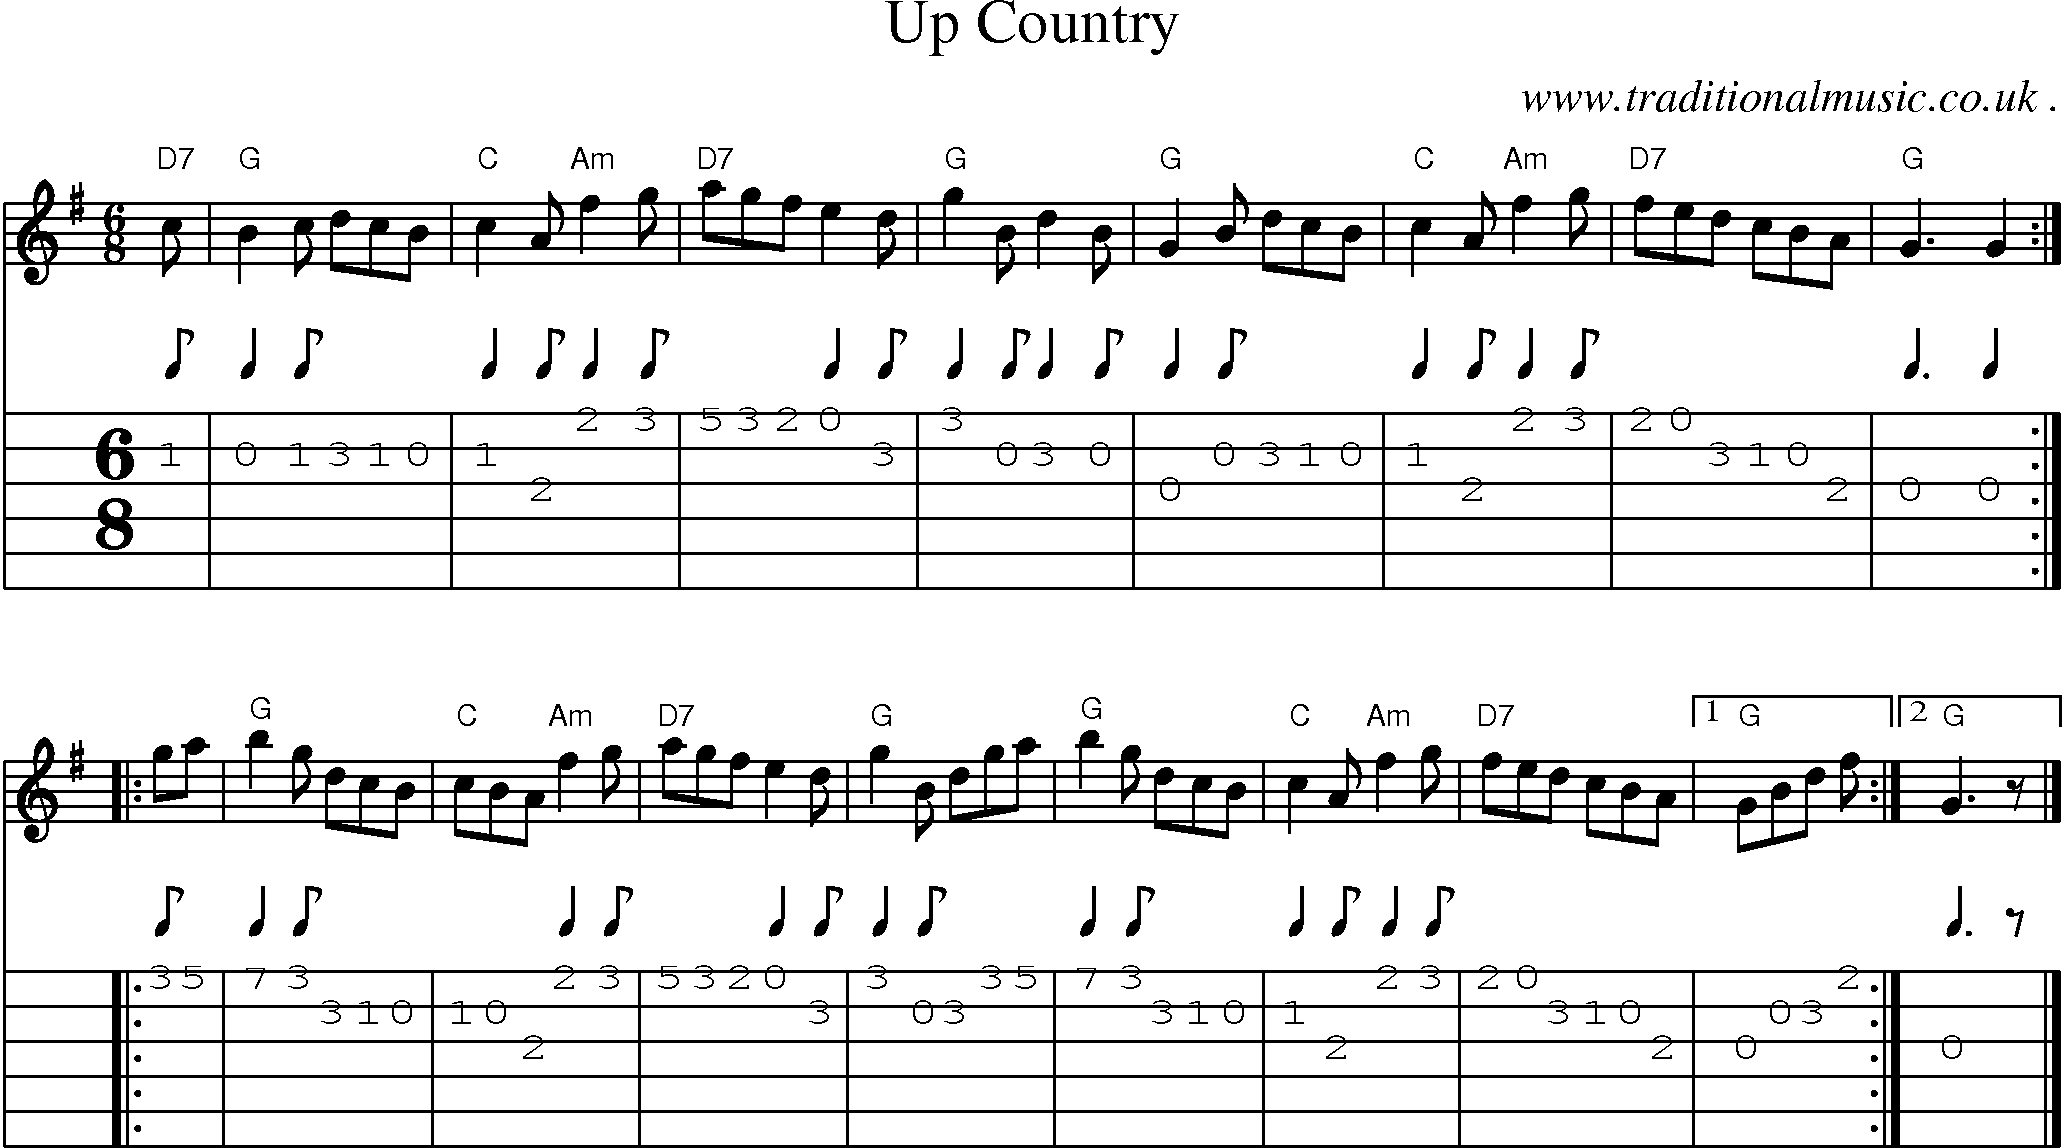 Sheet-music  score, Chords and Guitar Tabs for Up Country